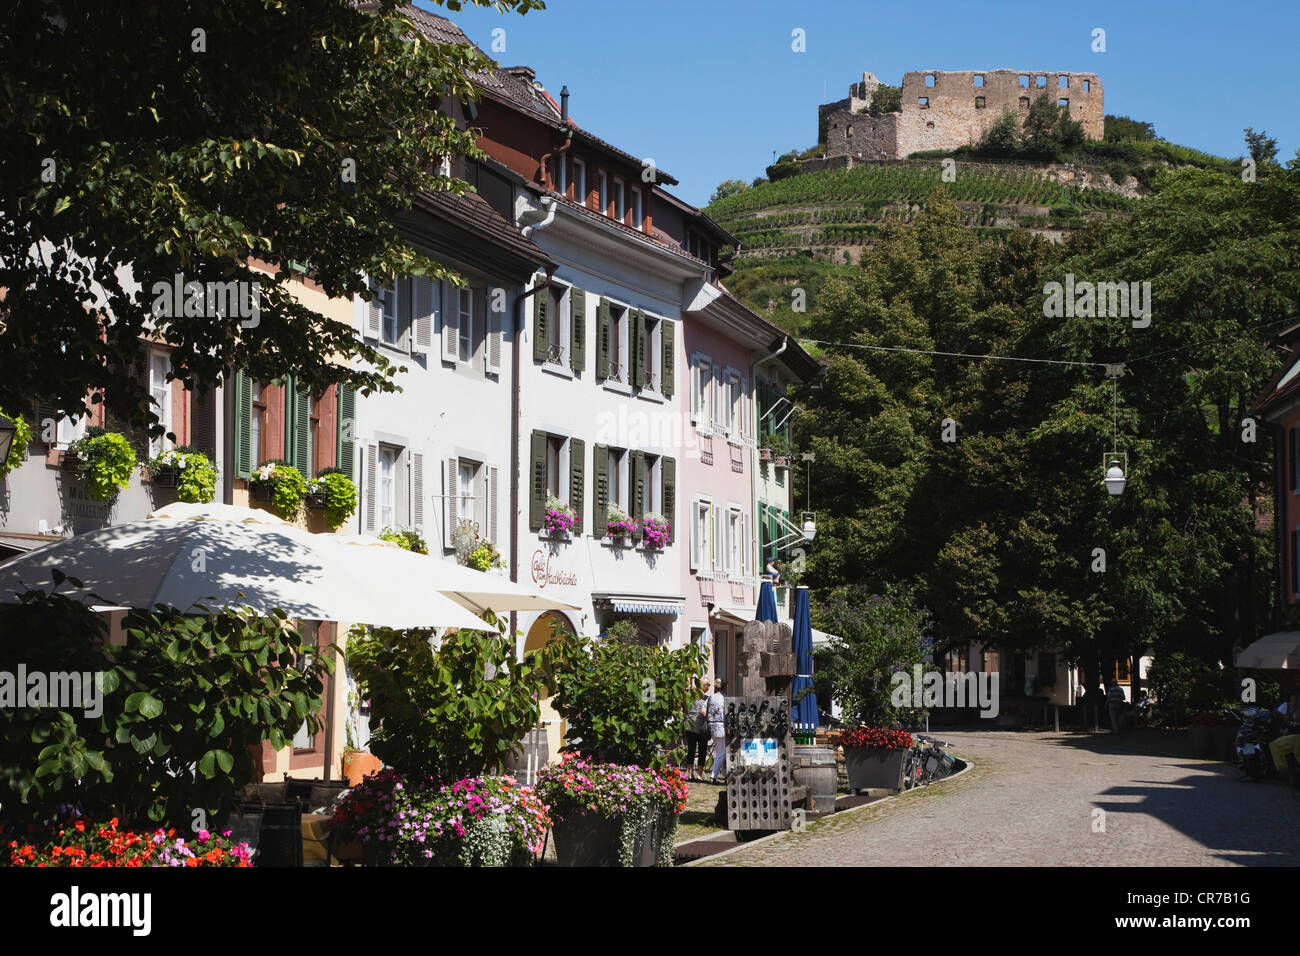 Germany, Baden Wuerttermberg, Staufen, Staufen, View of historic city with castle ruin Stock Photo